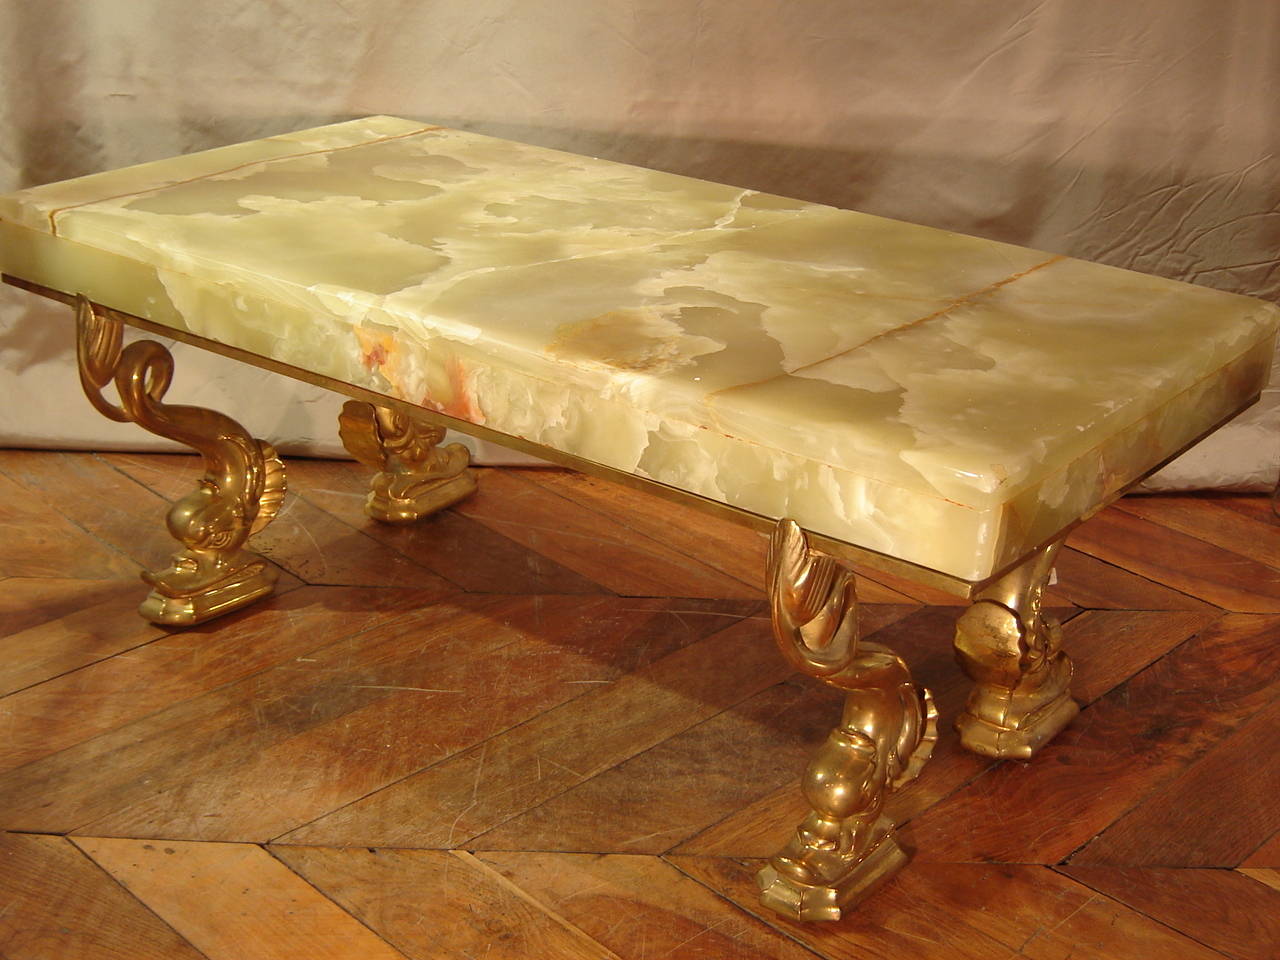 Coffee table in bronze and onyx green,very nice coffee table and rare, it consists of a gilded bronze base supported by four dolphins which come to rest in a tray onyx.tout the leg is gilt bronze was gilded, we also note that the tray Onyx has been